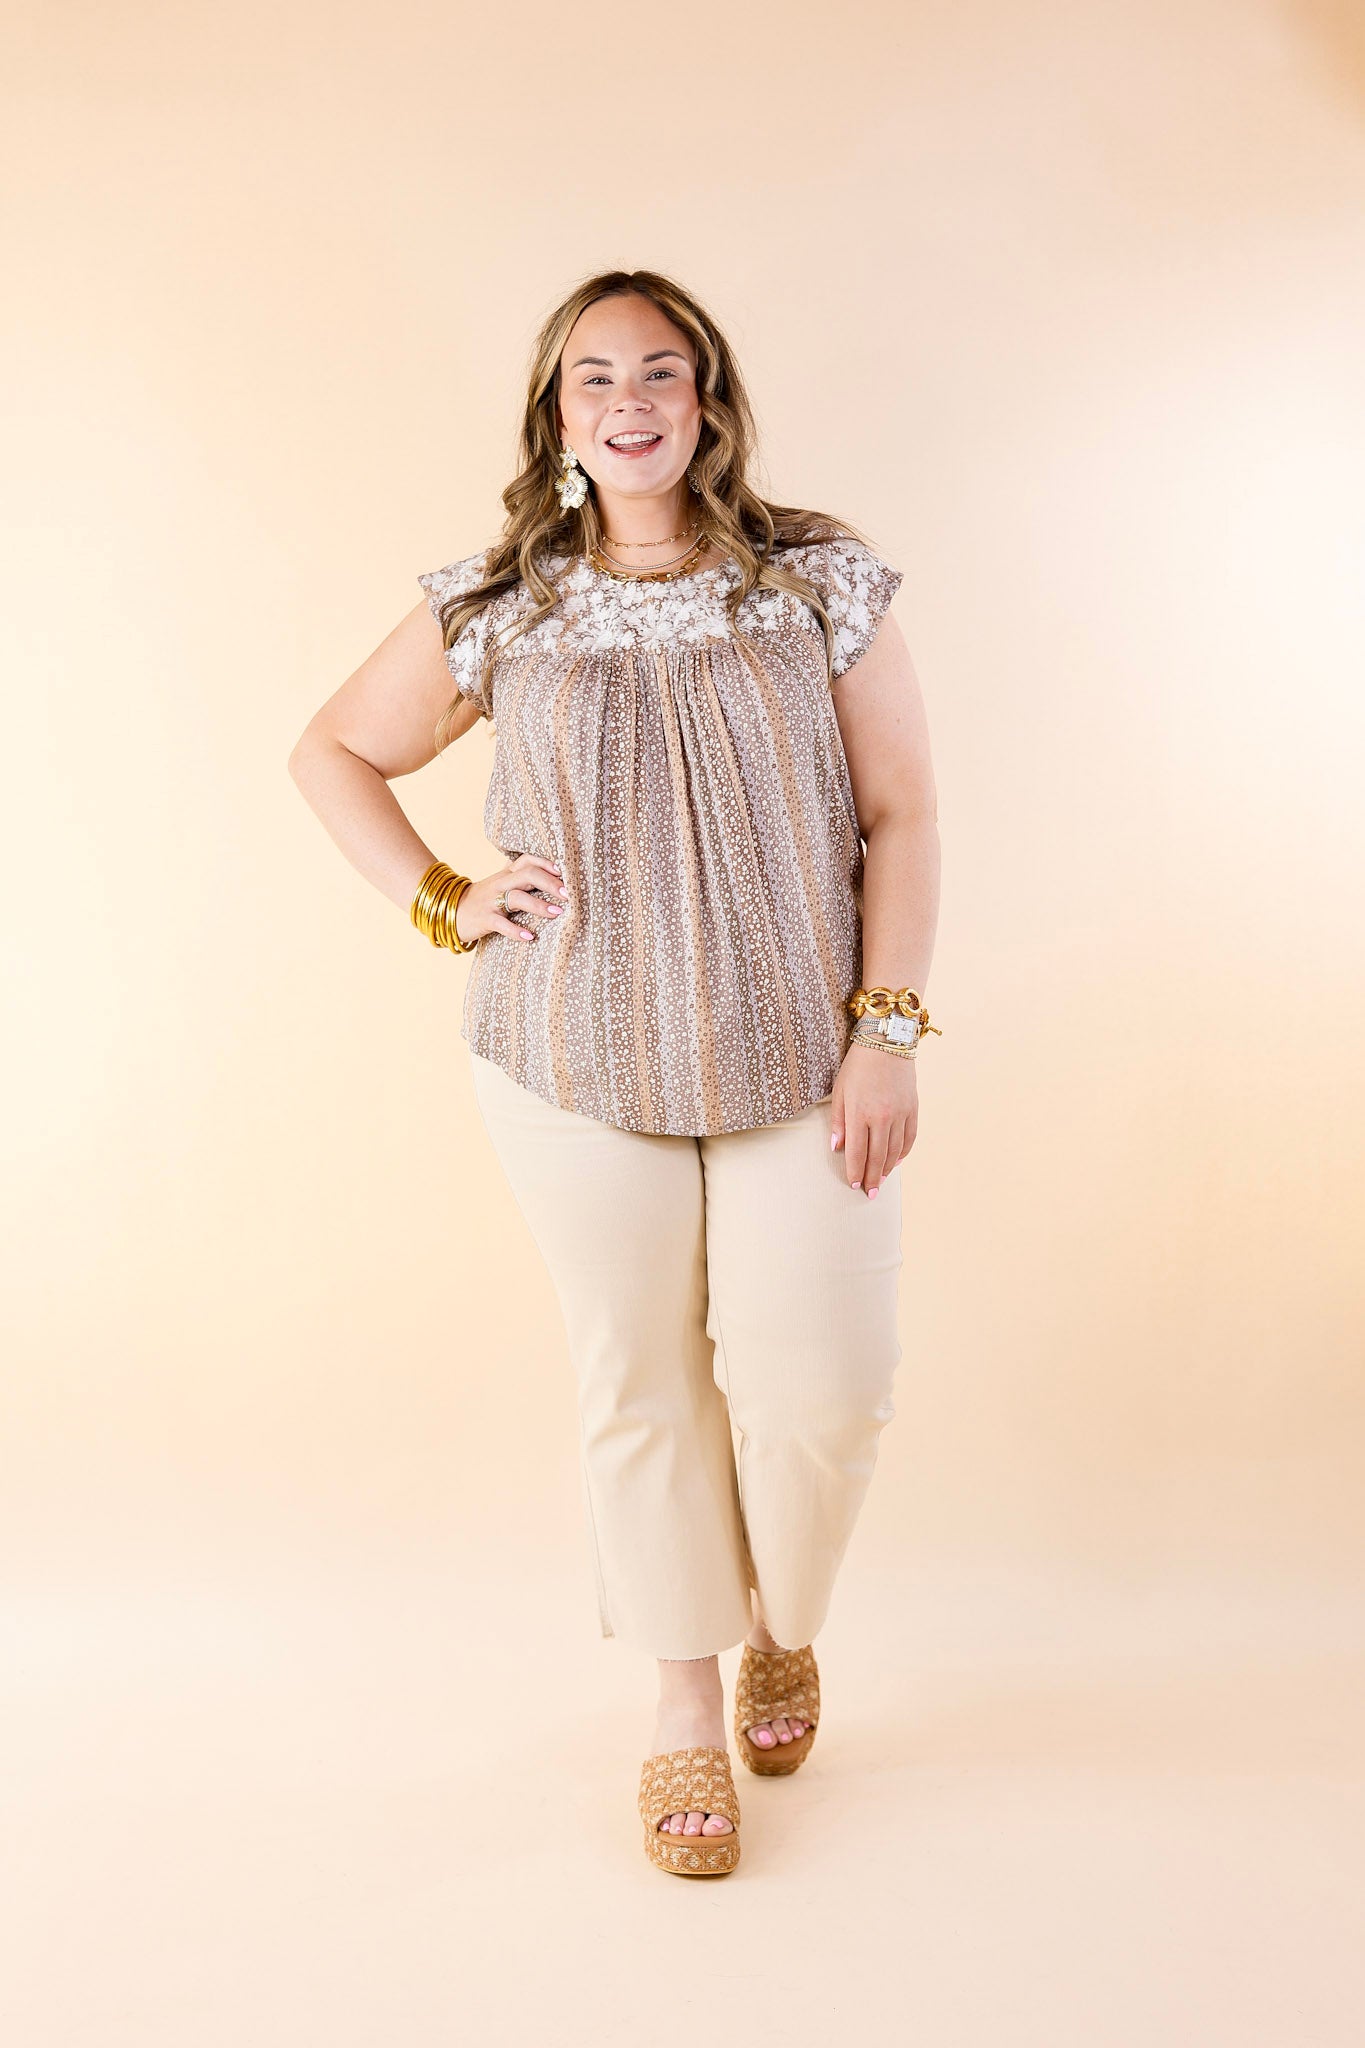 Festival Weather White Embroidered Floral Print Top with Cap Sleeves in Mocha Mix - Giddy Up Glamour Boutique